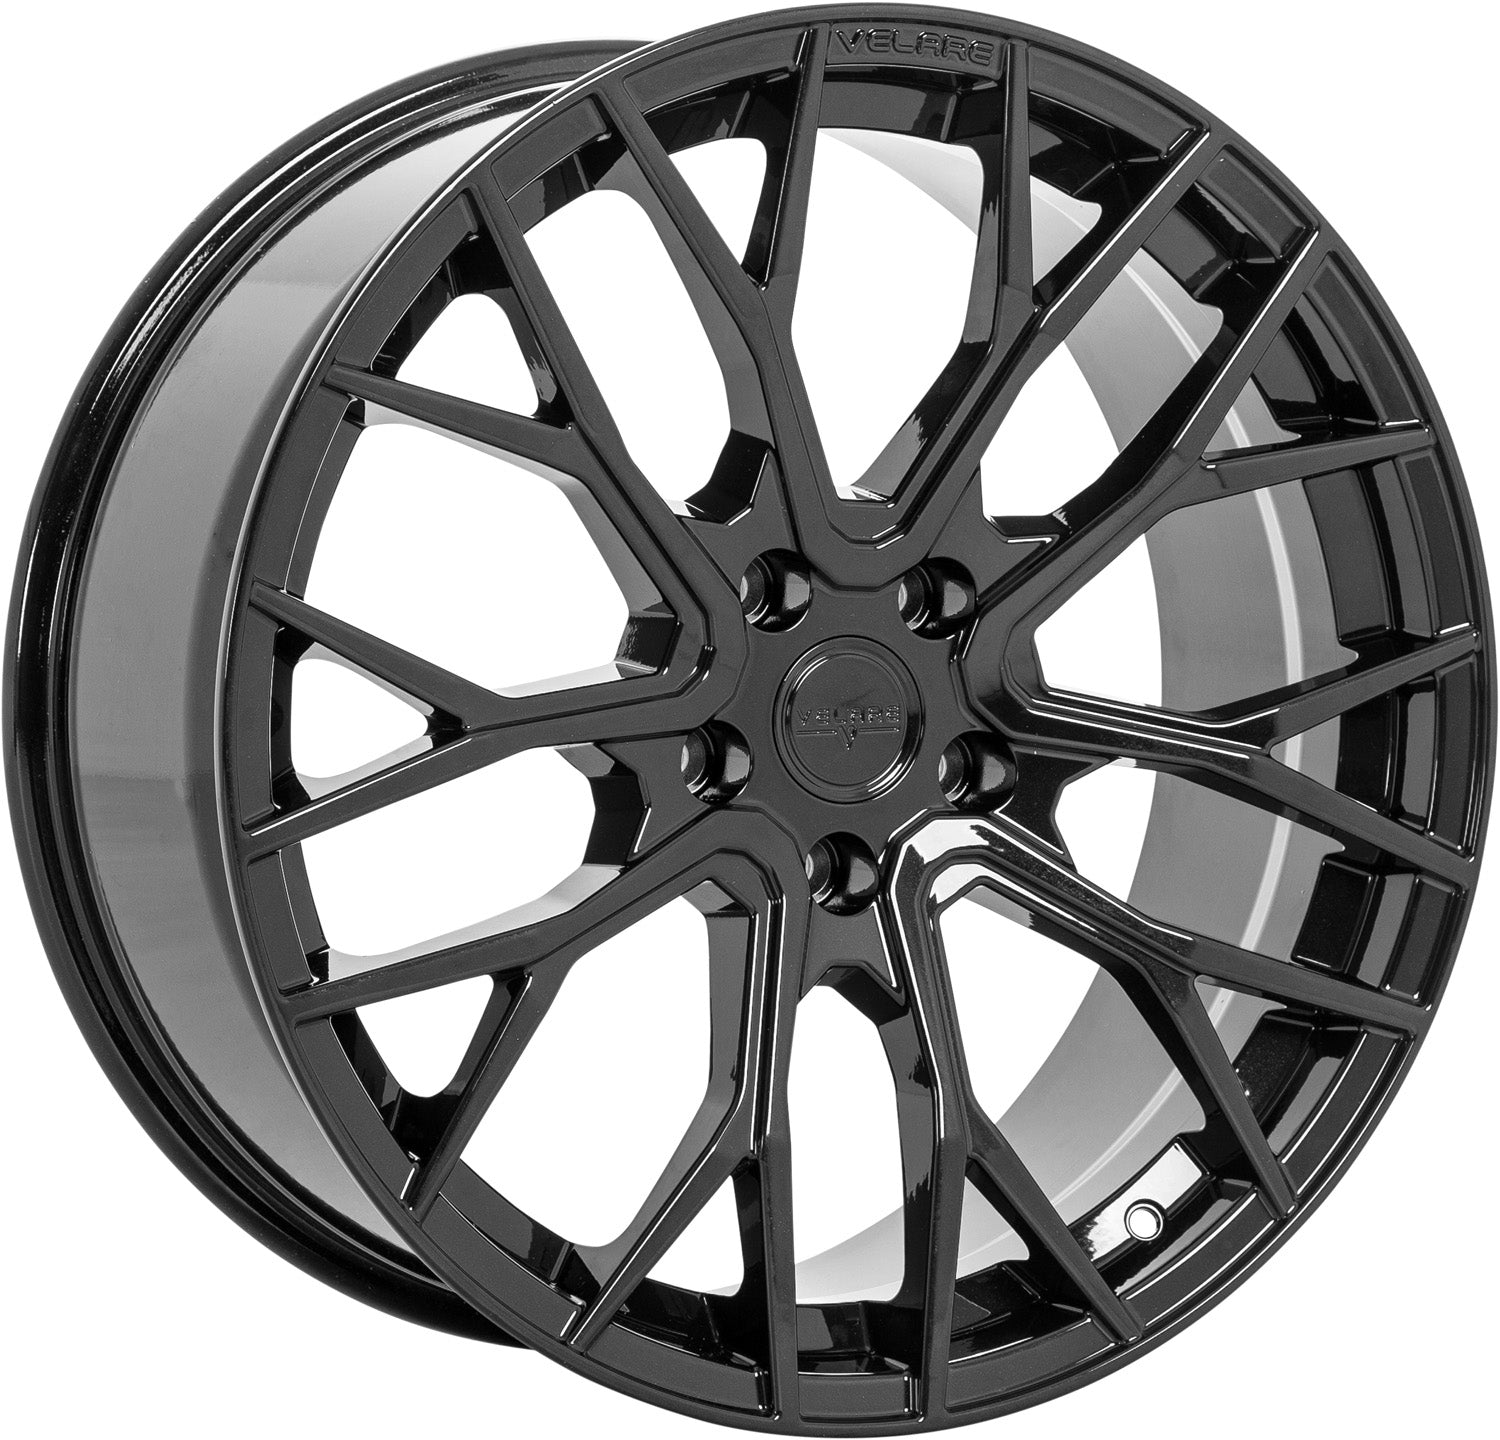 VLR08 Wheel and Tyre Package-Alloy wheels-Velare- DC Leisure